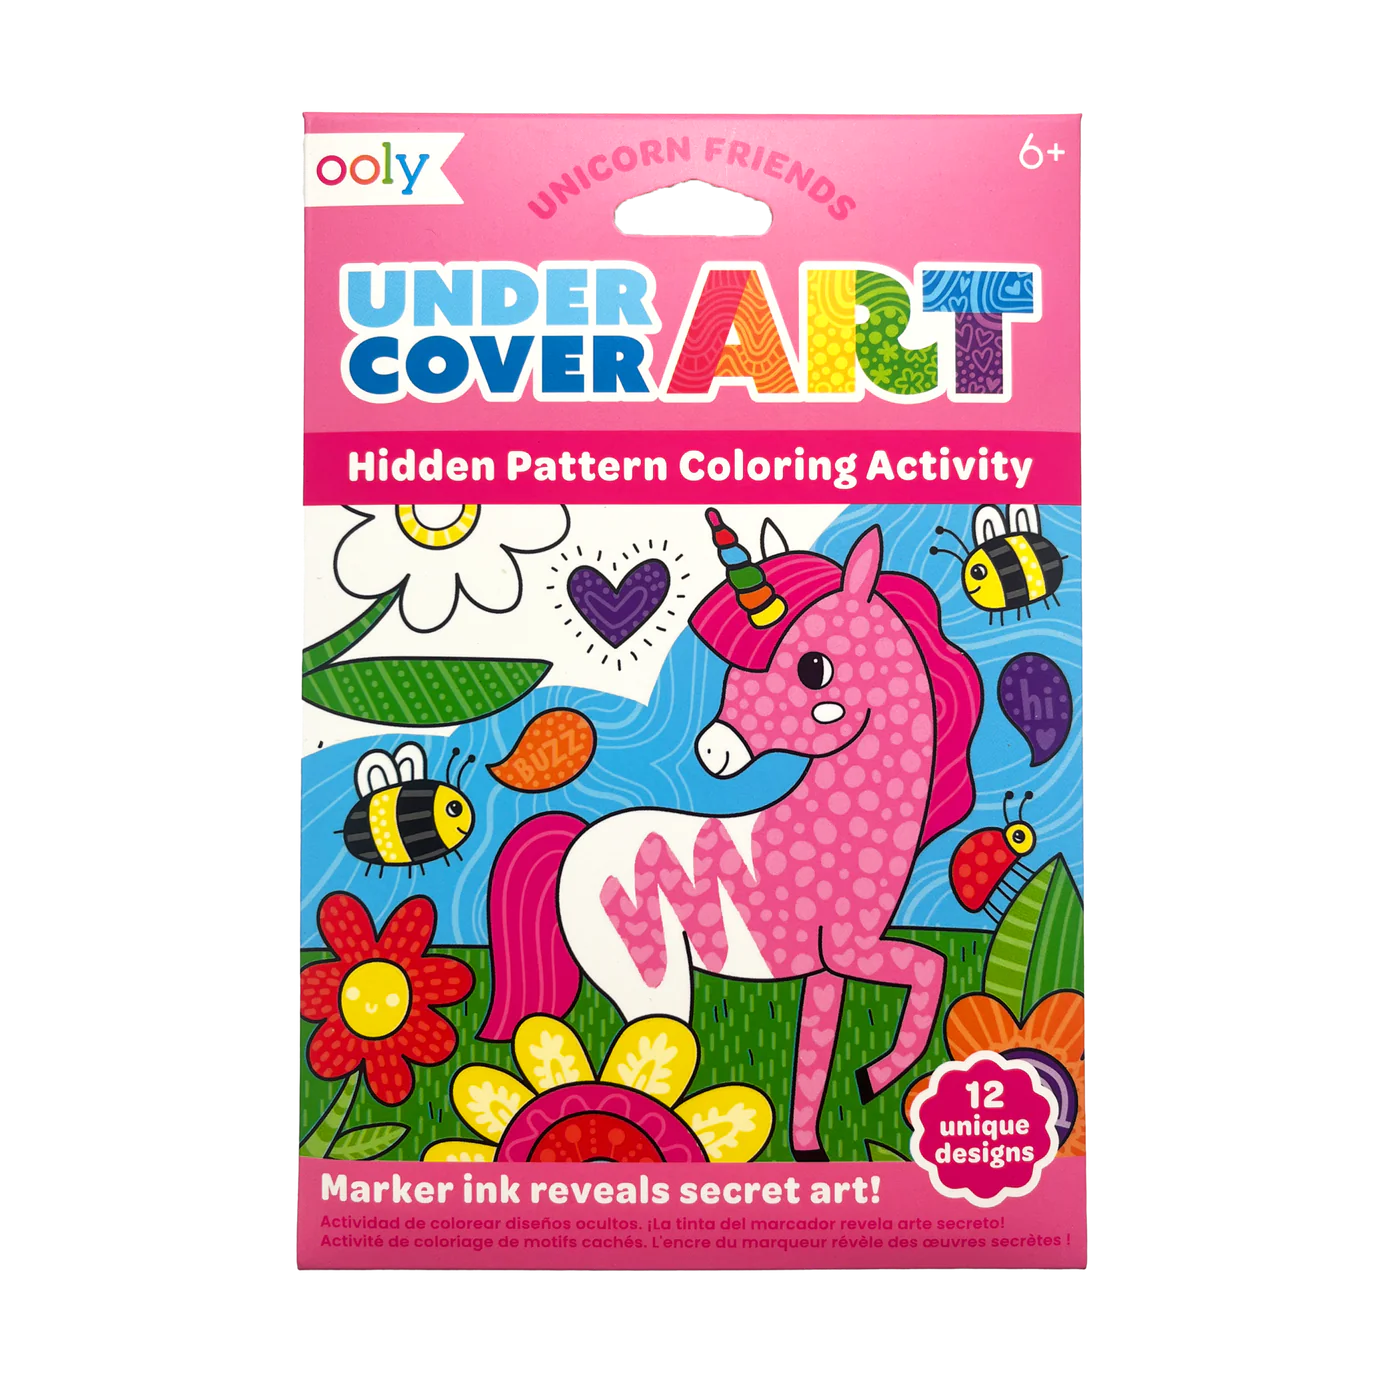 Ooly Undercover Art Hidden Pattern Coloring Activity Art Cards - Unicorn Friends-OOLY-Little Giant Kidz